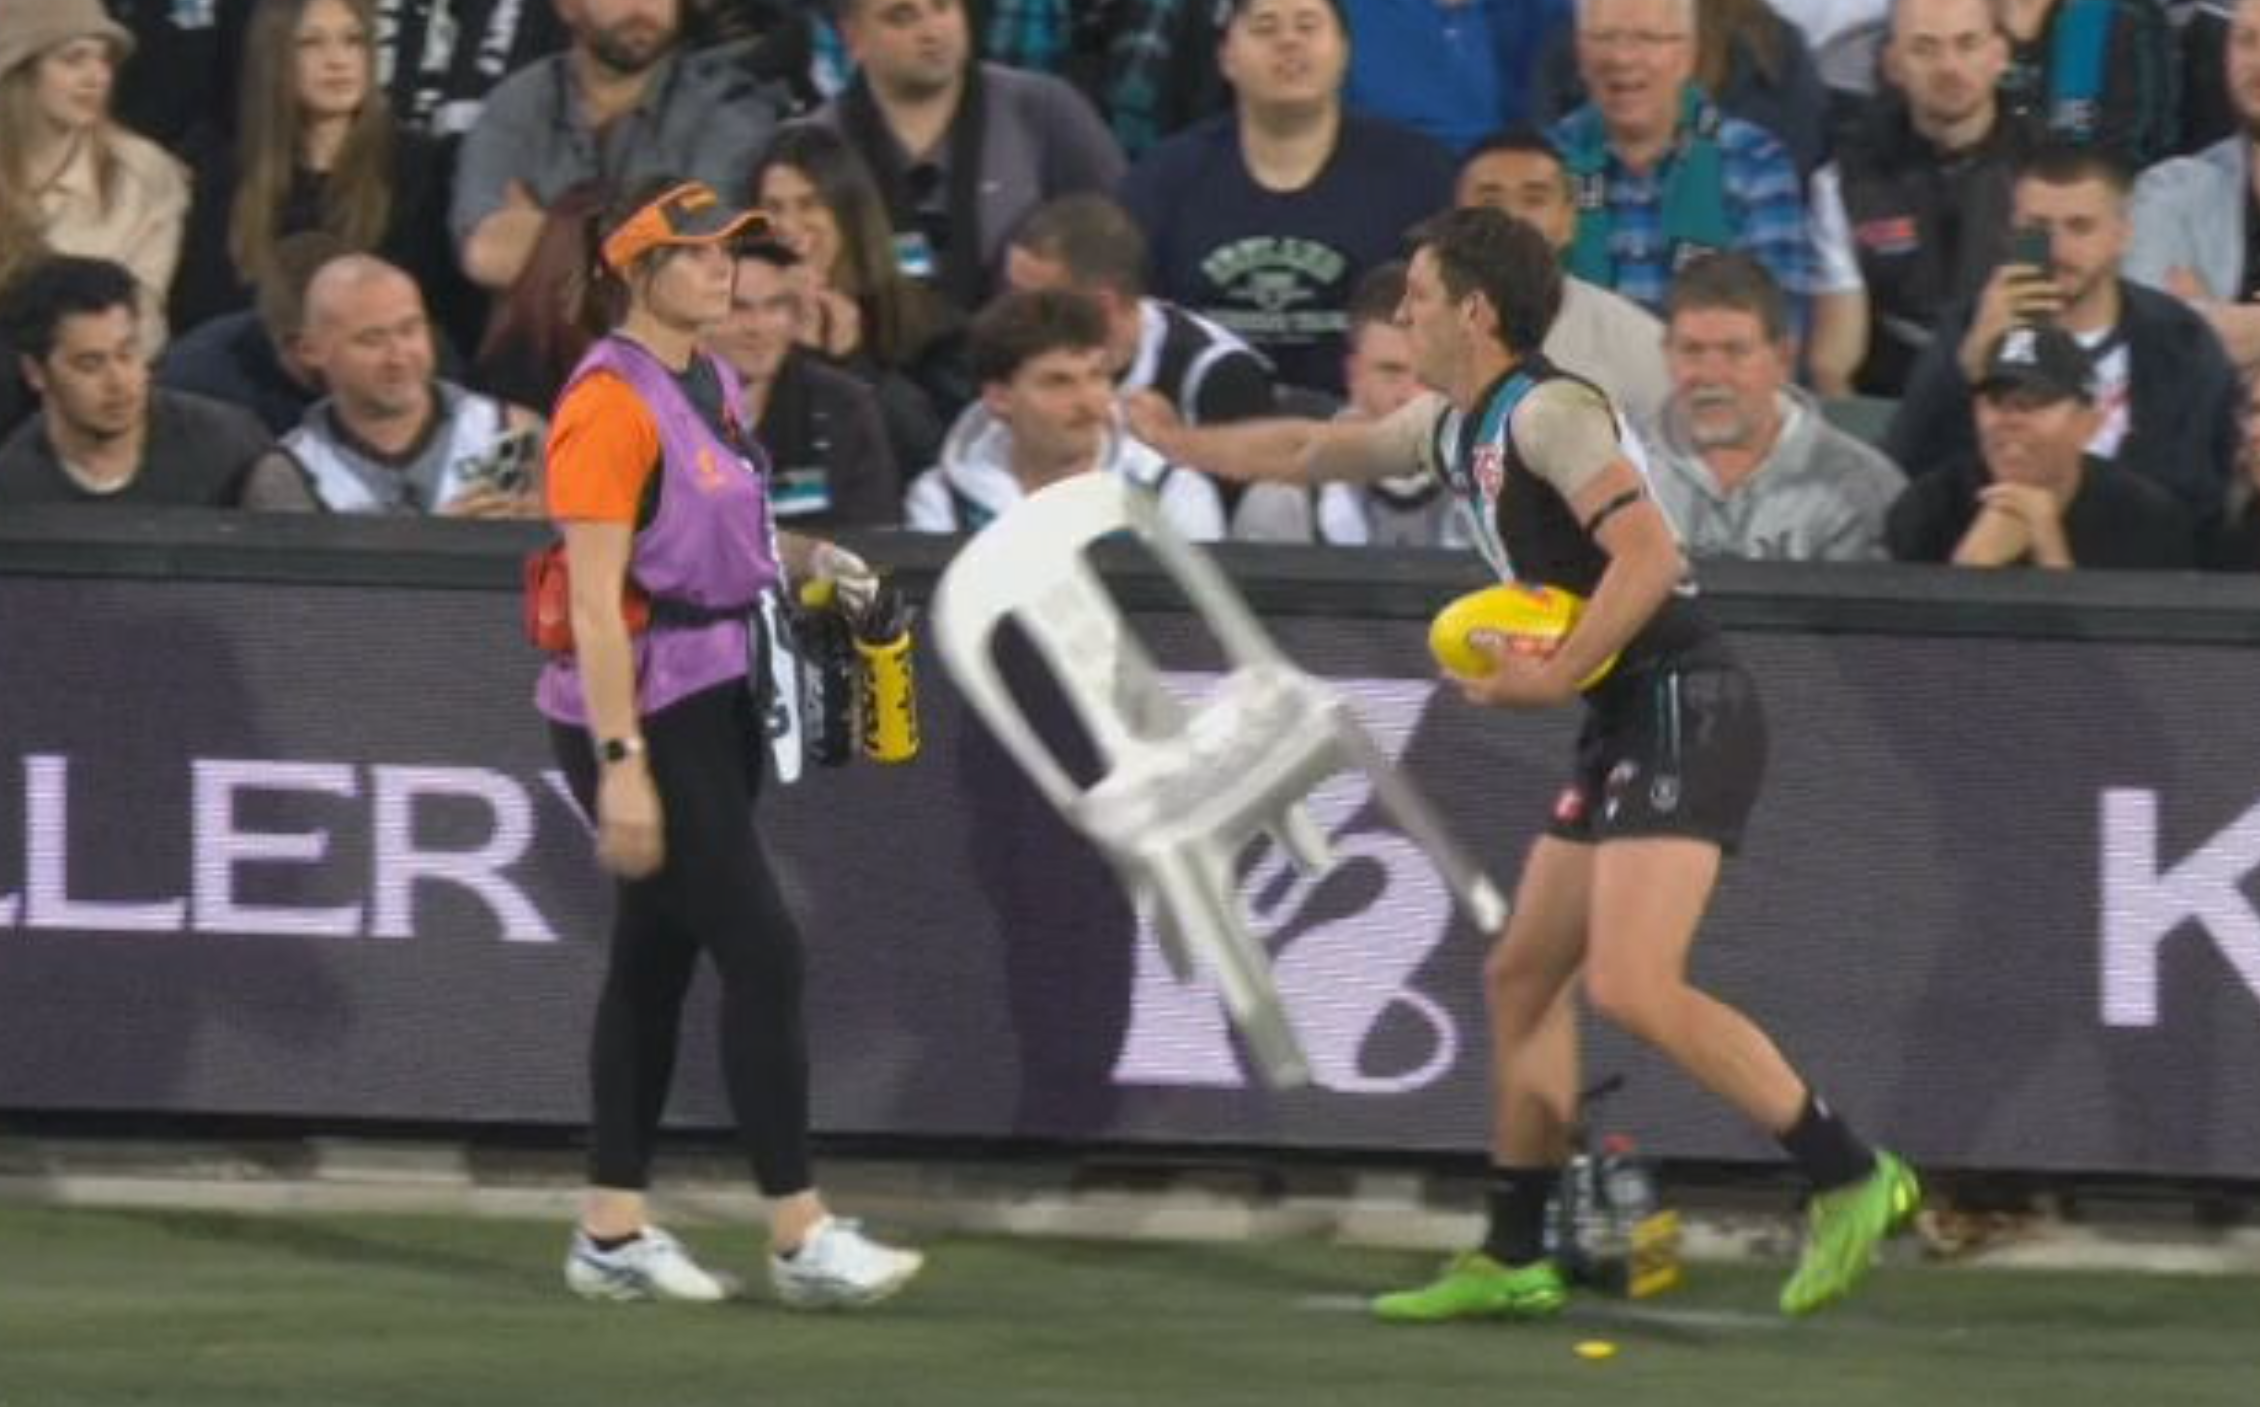 Zak Butters throws chair in frustration with GWS Giants trainer during Port Adelaide's loss